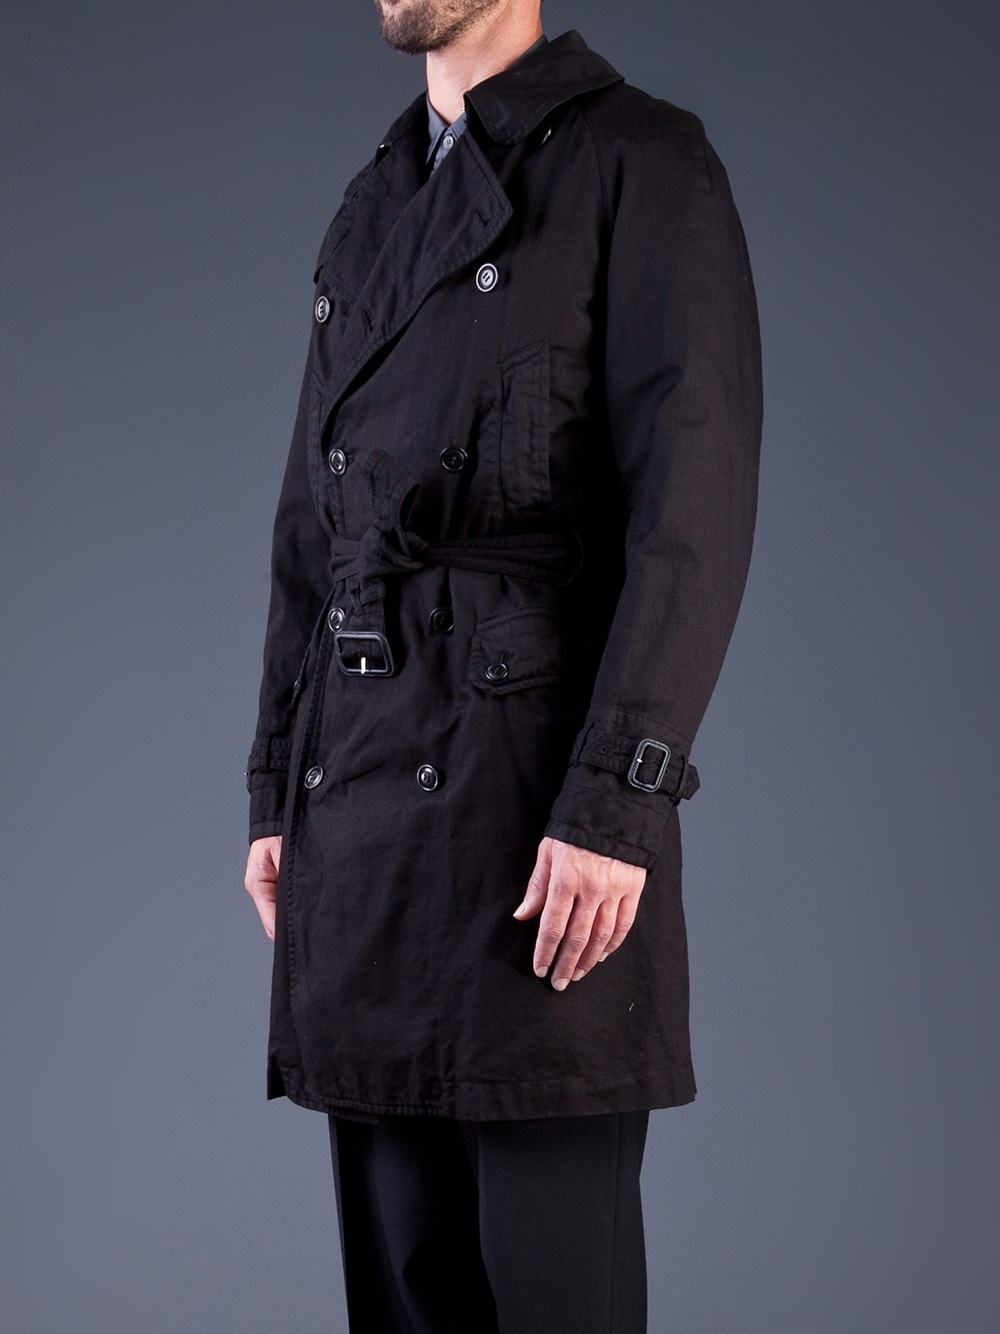 Junya Watanabe Double Breasted Trench Coat in Black for Men - Lyst